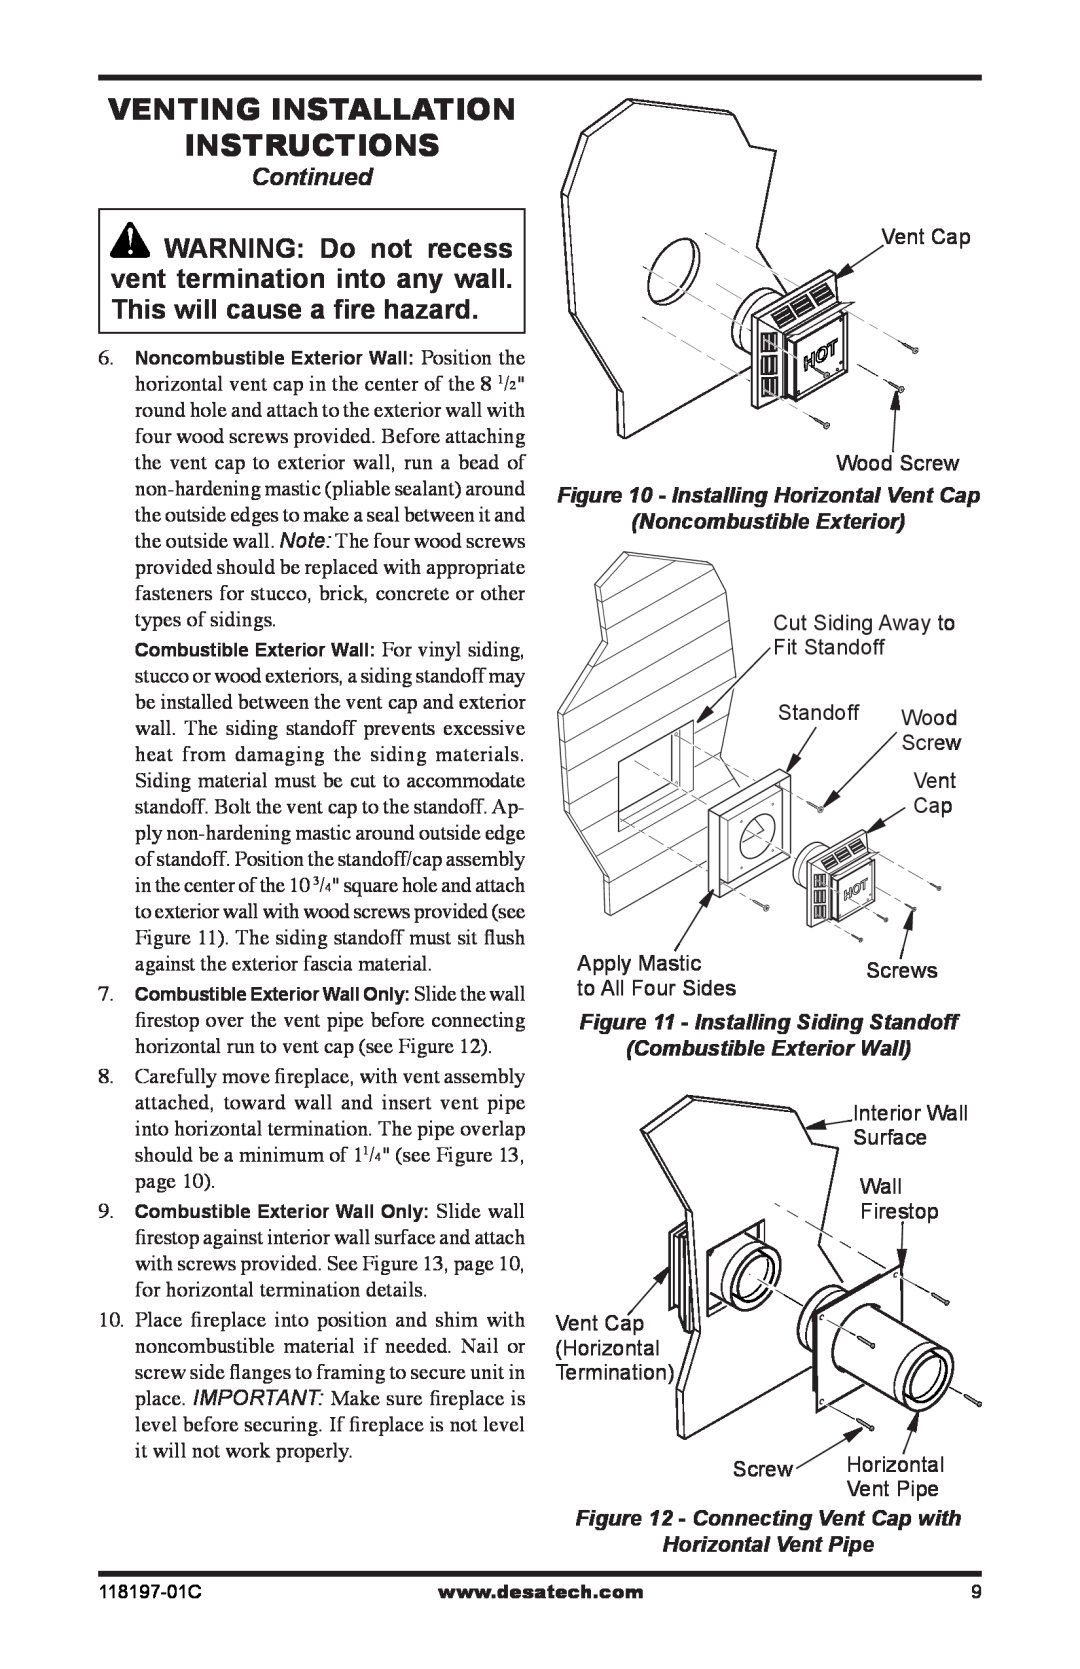 Desa (V)DVC36(B)(H) Venting Installation instructions, Continued, Vent Cap Wood Screw, Apply Mastic, to All Four Sides 